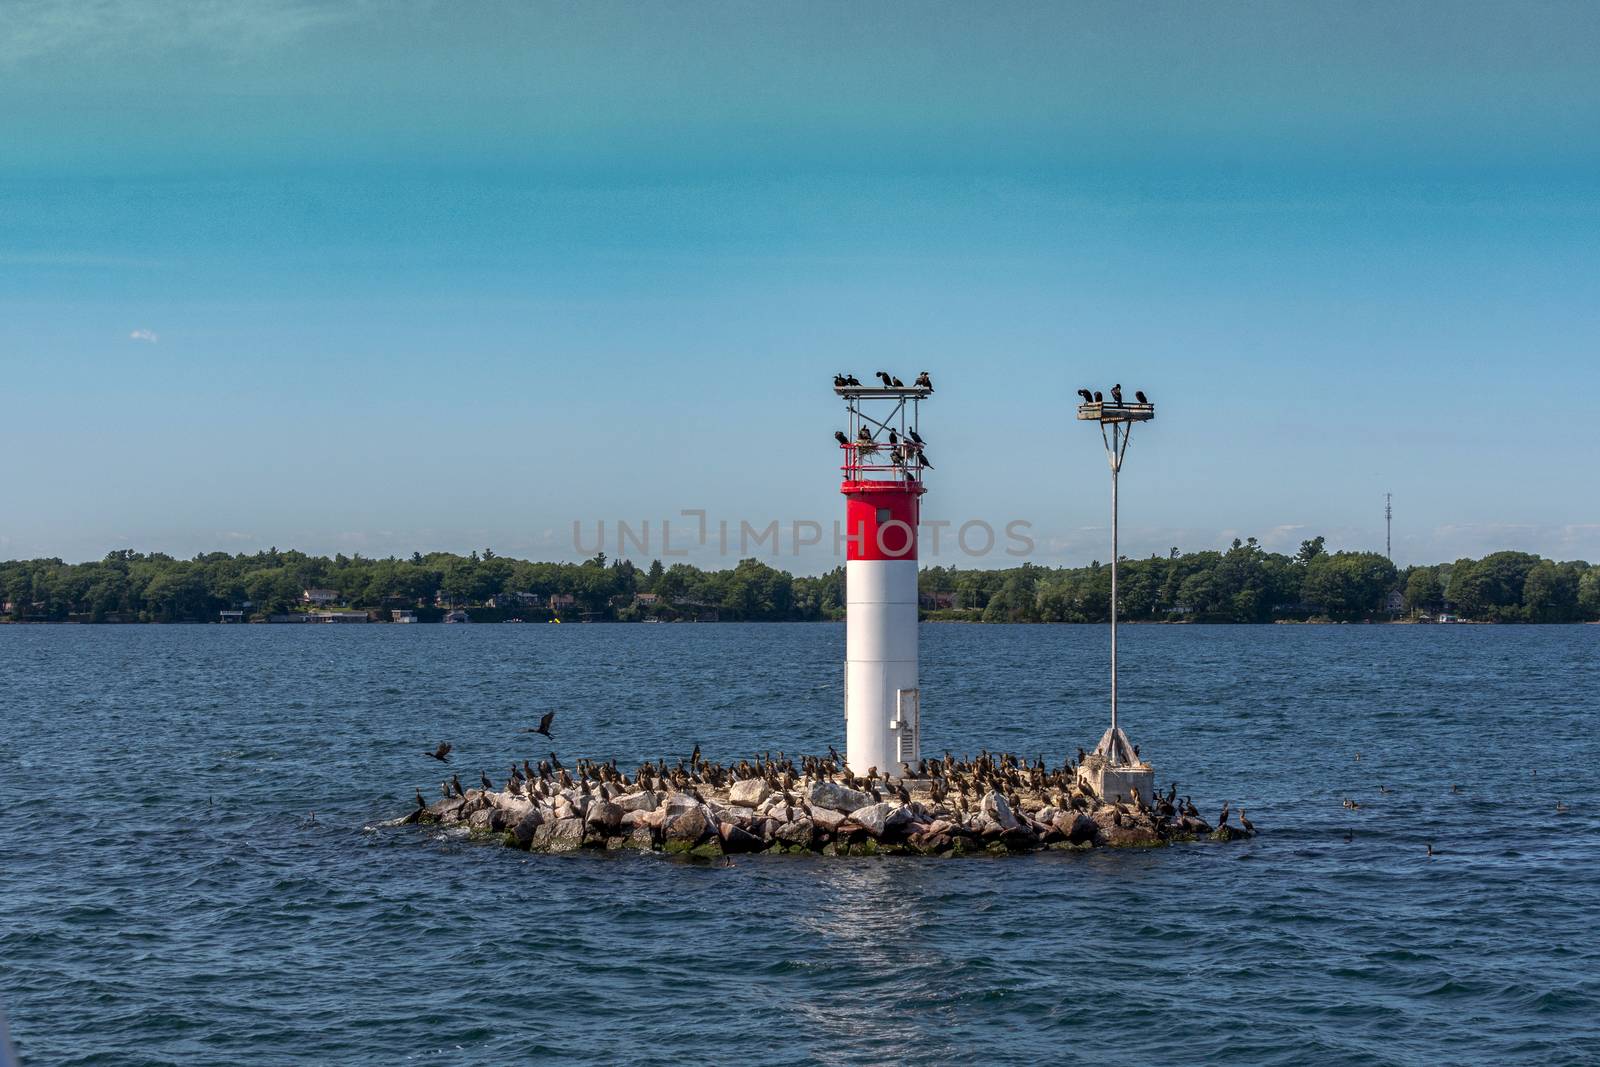 Cormorants occupied a small island with an installed signal buoy